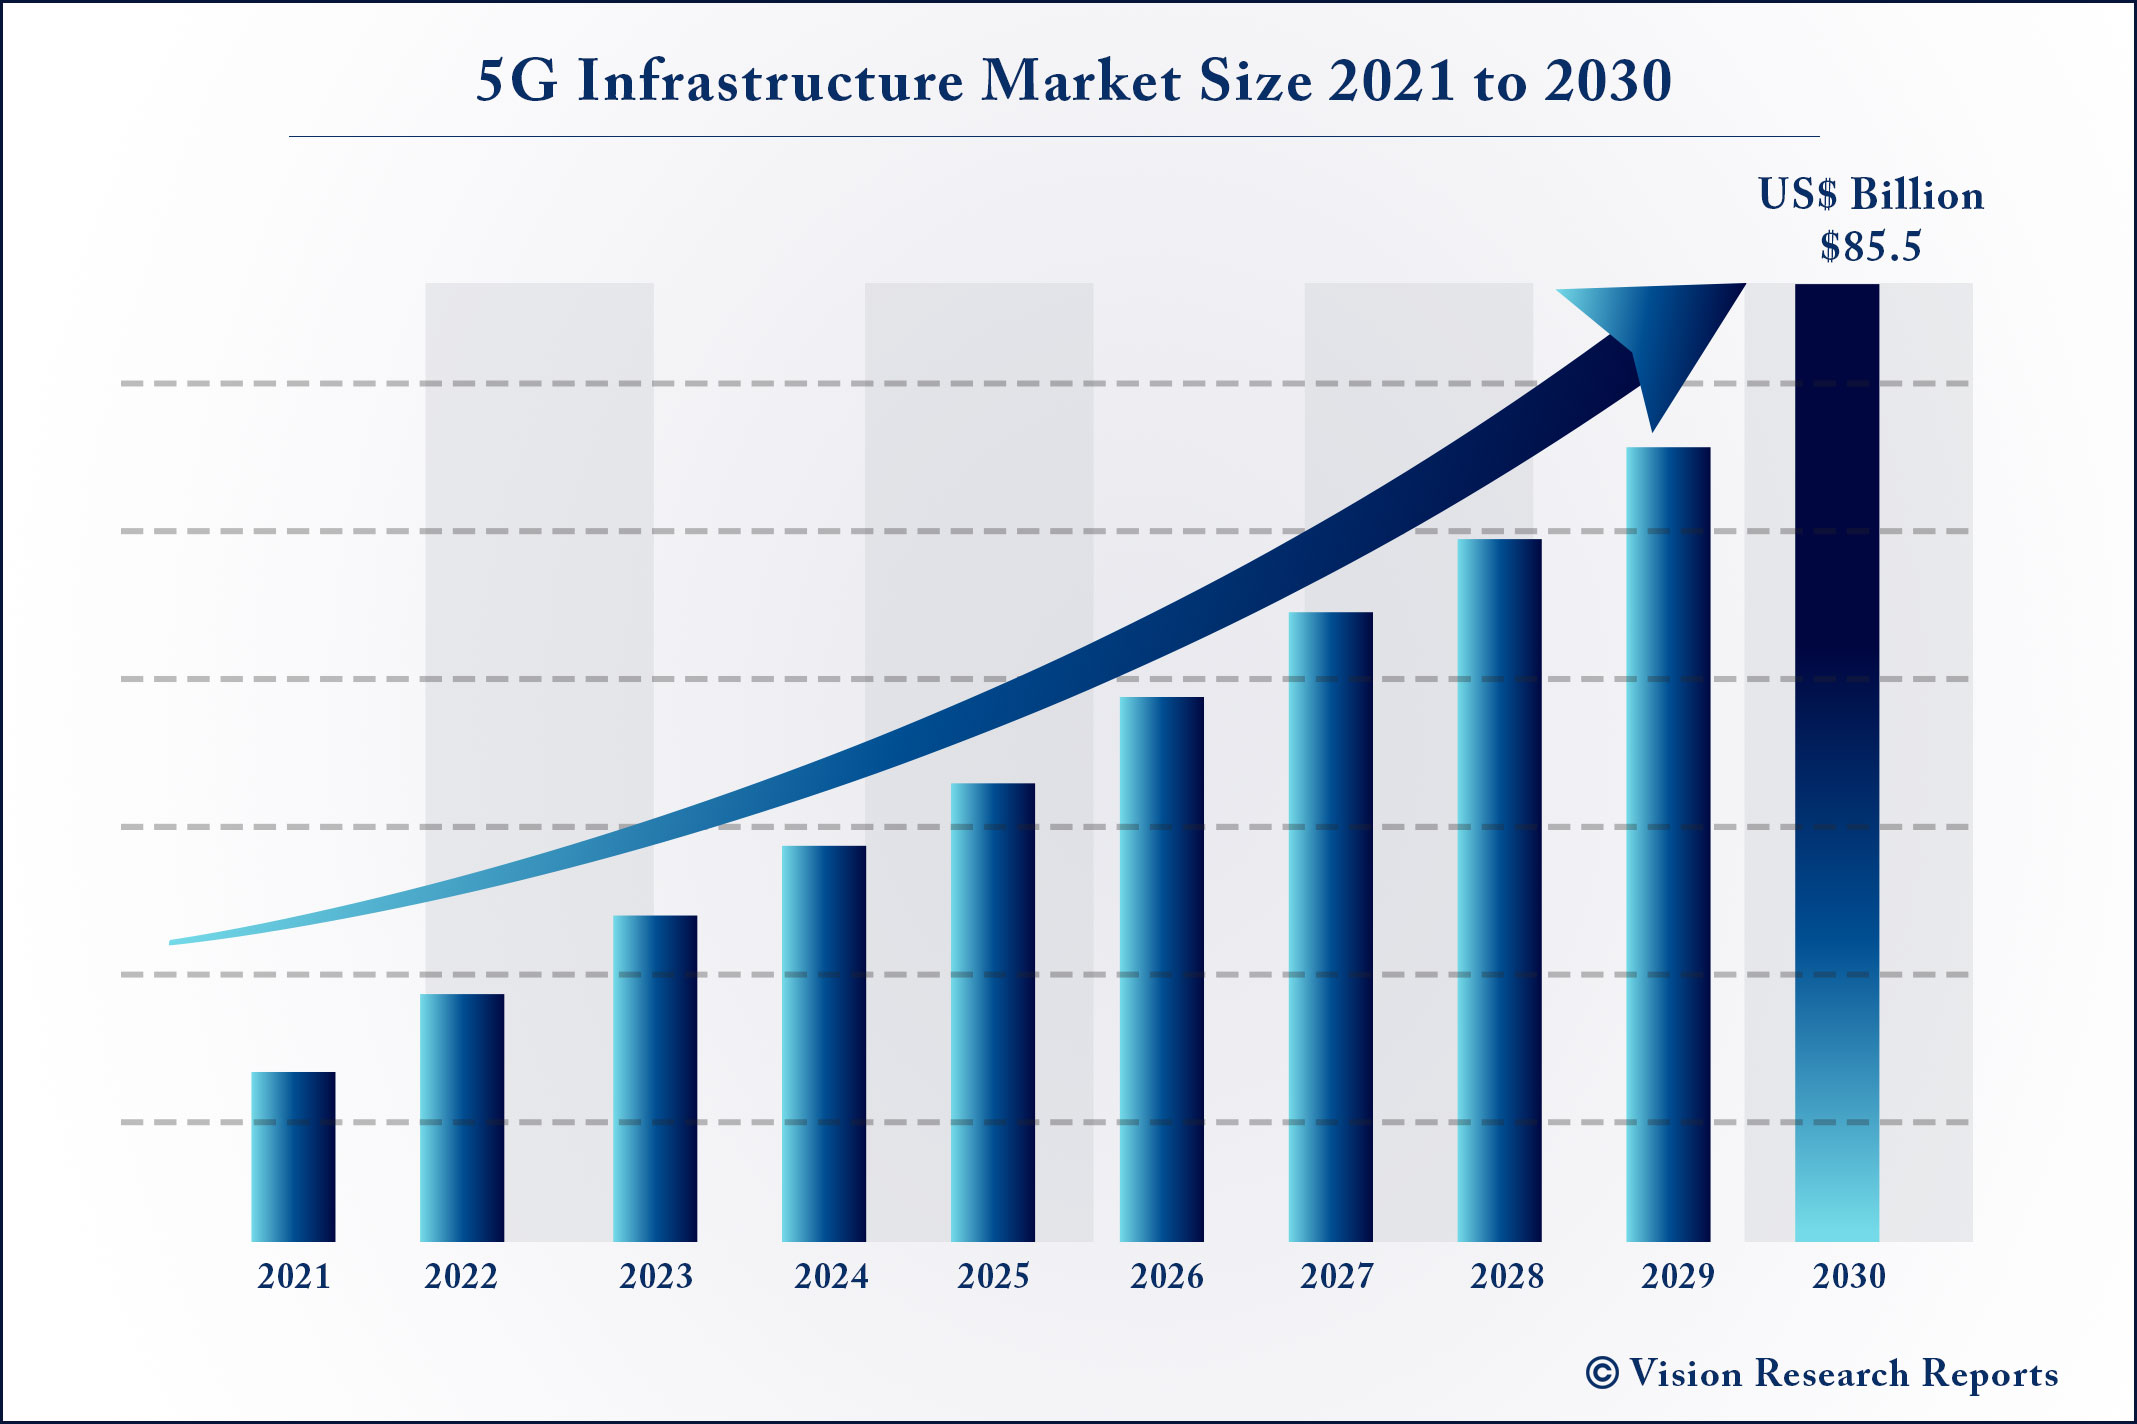 5G Infrastructure Market Size 2021 to 2030